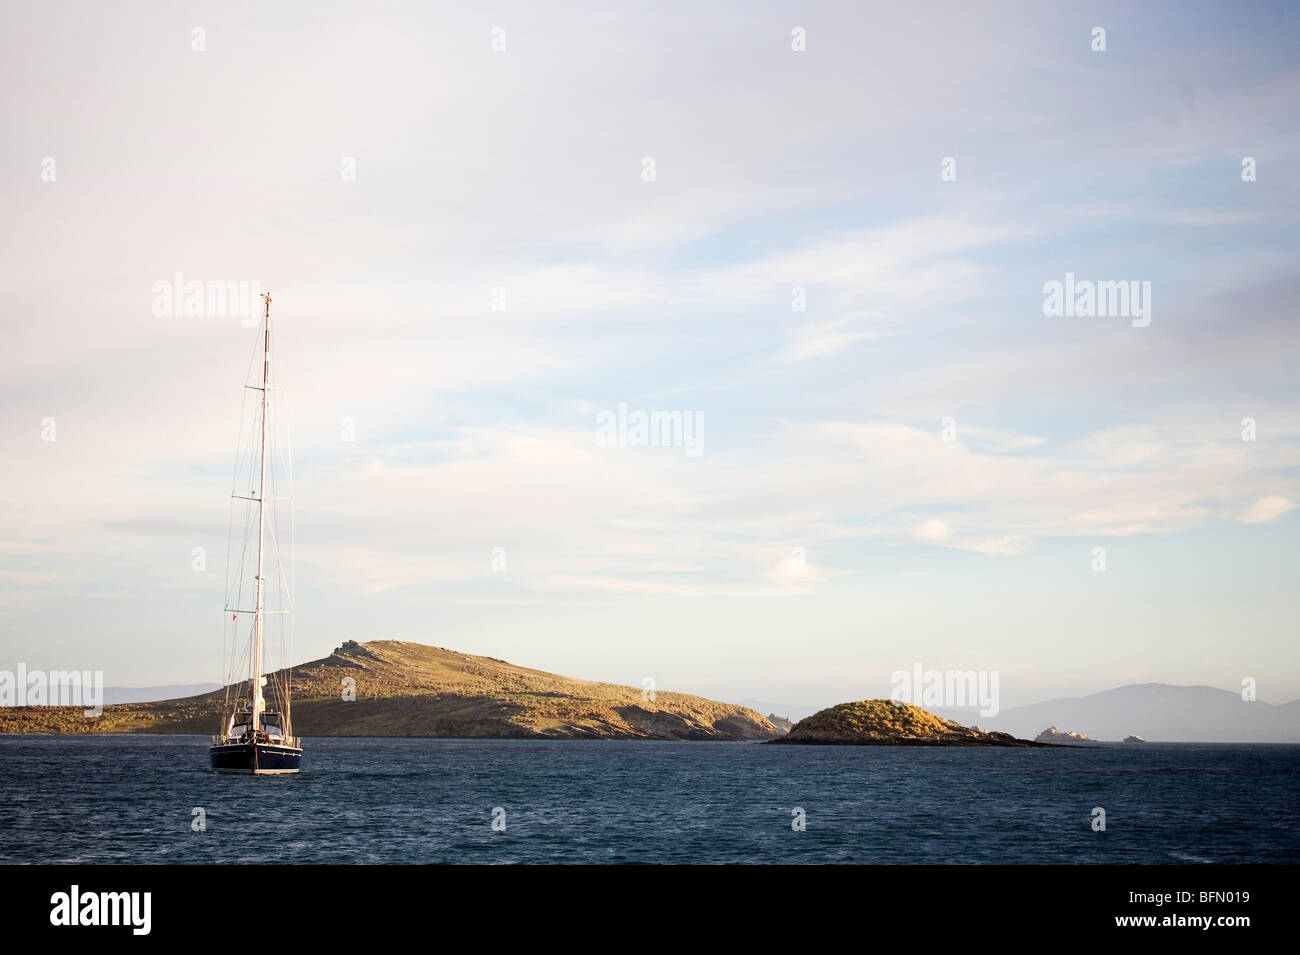 Falkland Islands, Carcass Island. Yacht moored in Port Pattison, a sheltered bay on the island's south coast. Stock Photo